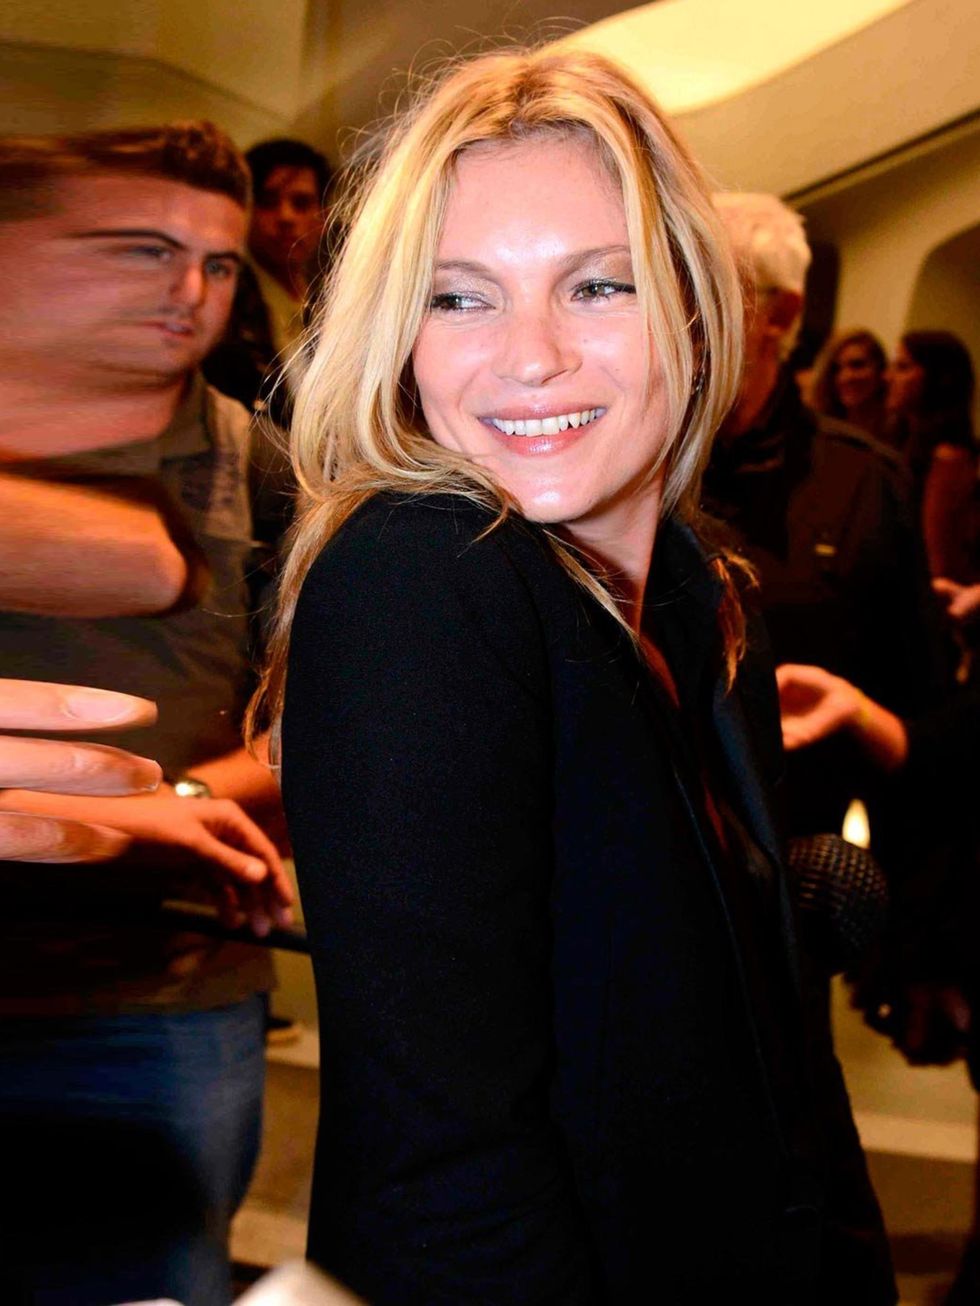 <p>Kate Moss wearing Saint Laurent at the Stuart Weitzman Boutique during Milan Fashion Week.</p><p><a href="http://www.elleuk.com/star-style/red-carpet/london-fashion-week-the-front-row-celebrities-out-and-about-and-at-the-shows">Front row at London Fash